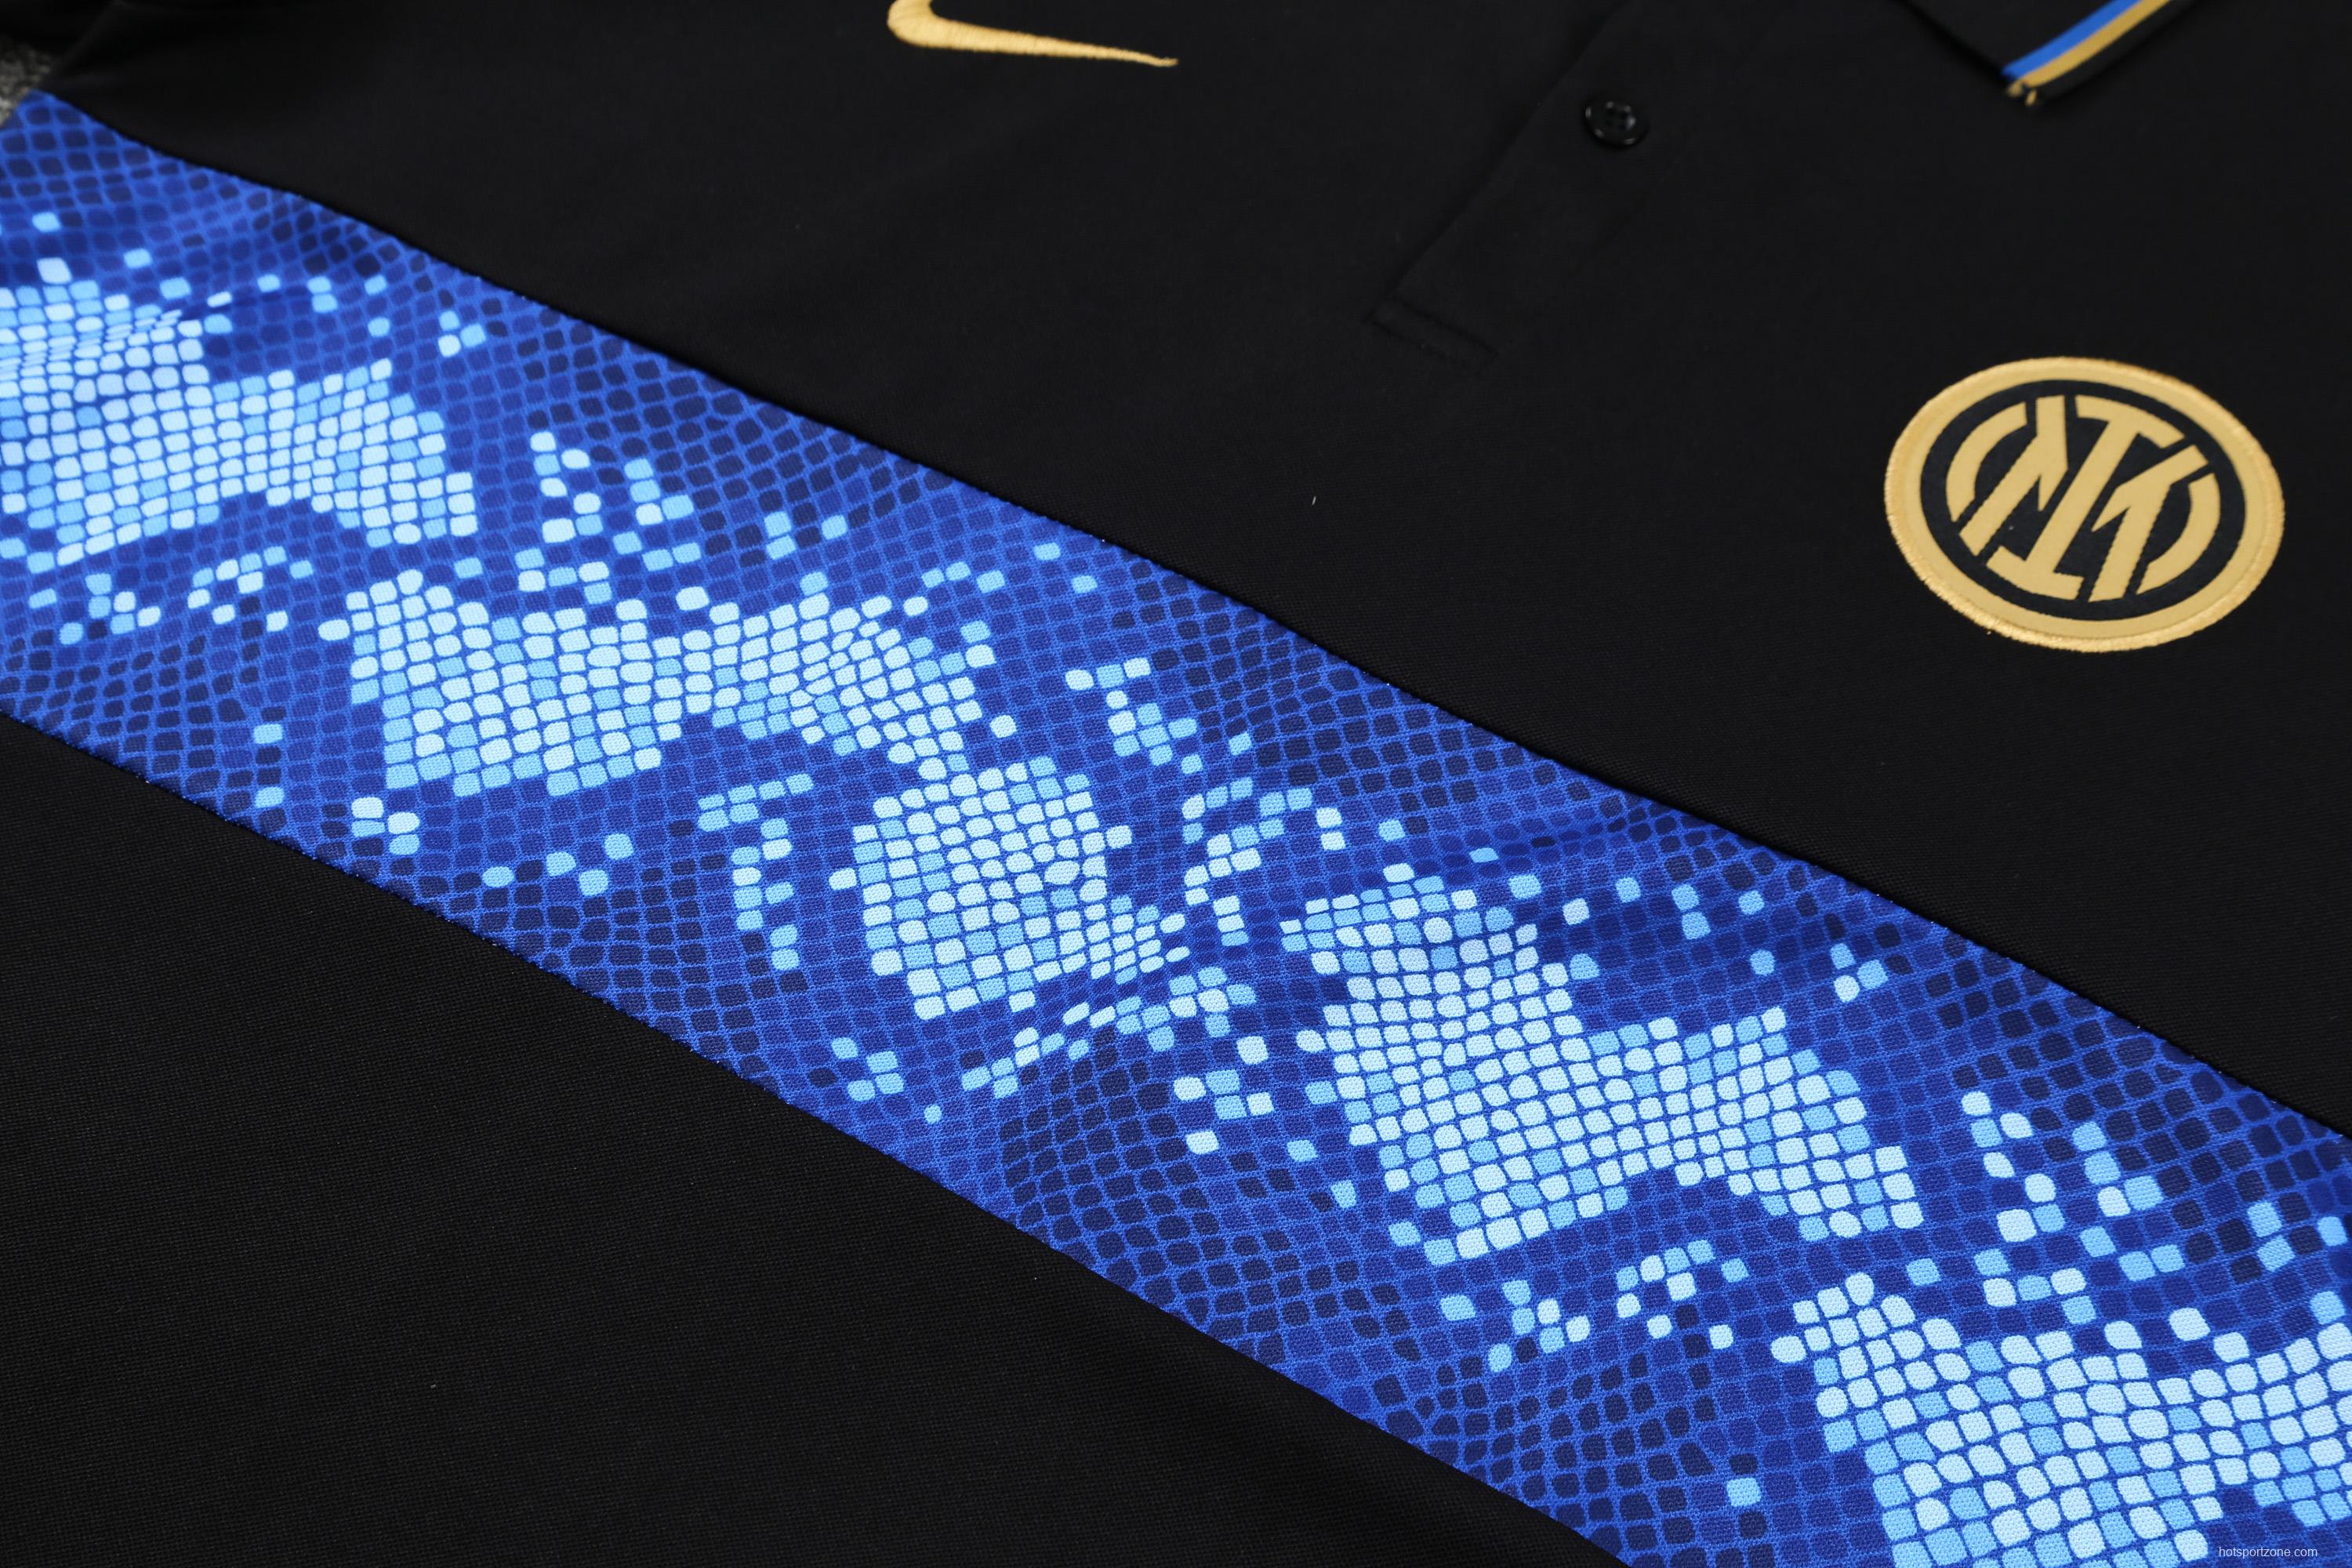 Inter Milan POLO kit black and blue pattern(not supported to be sold separately)